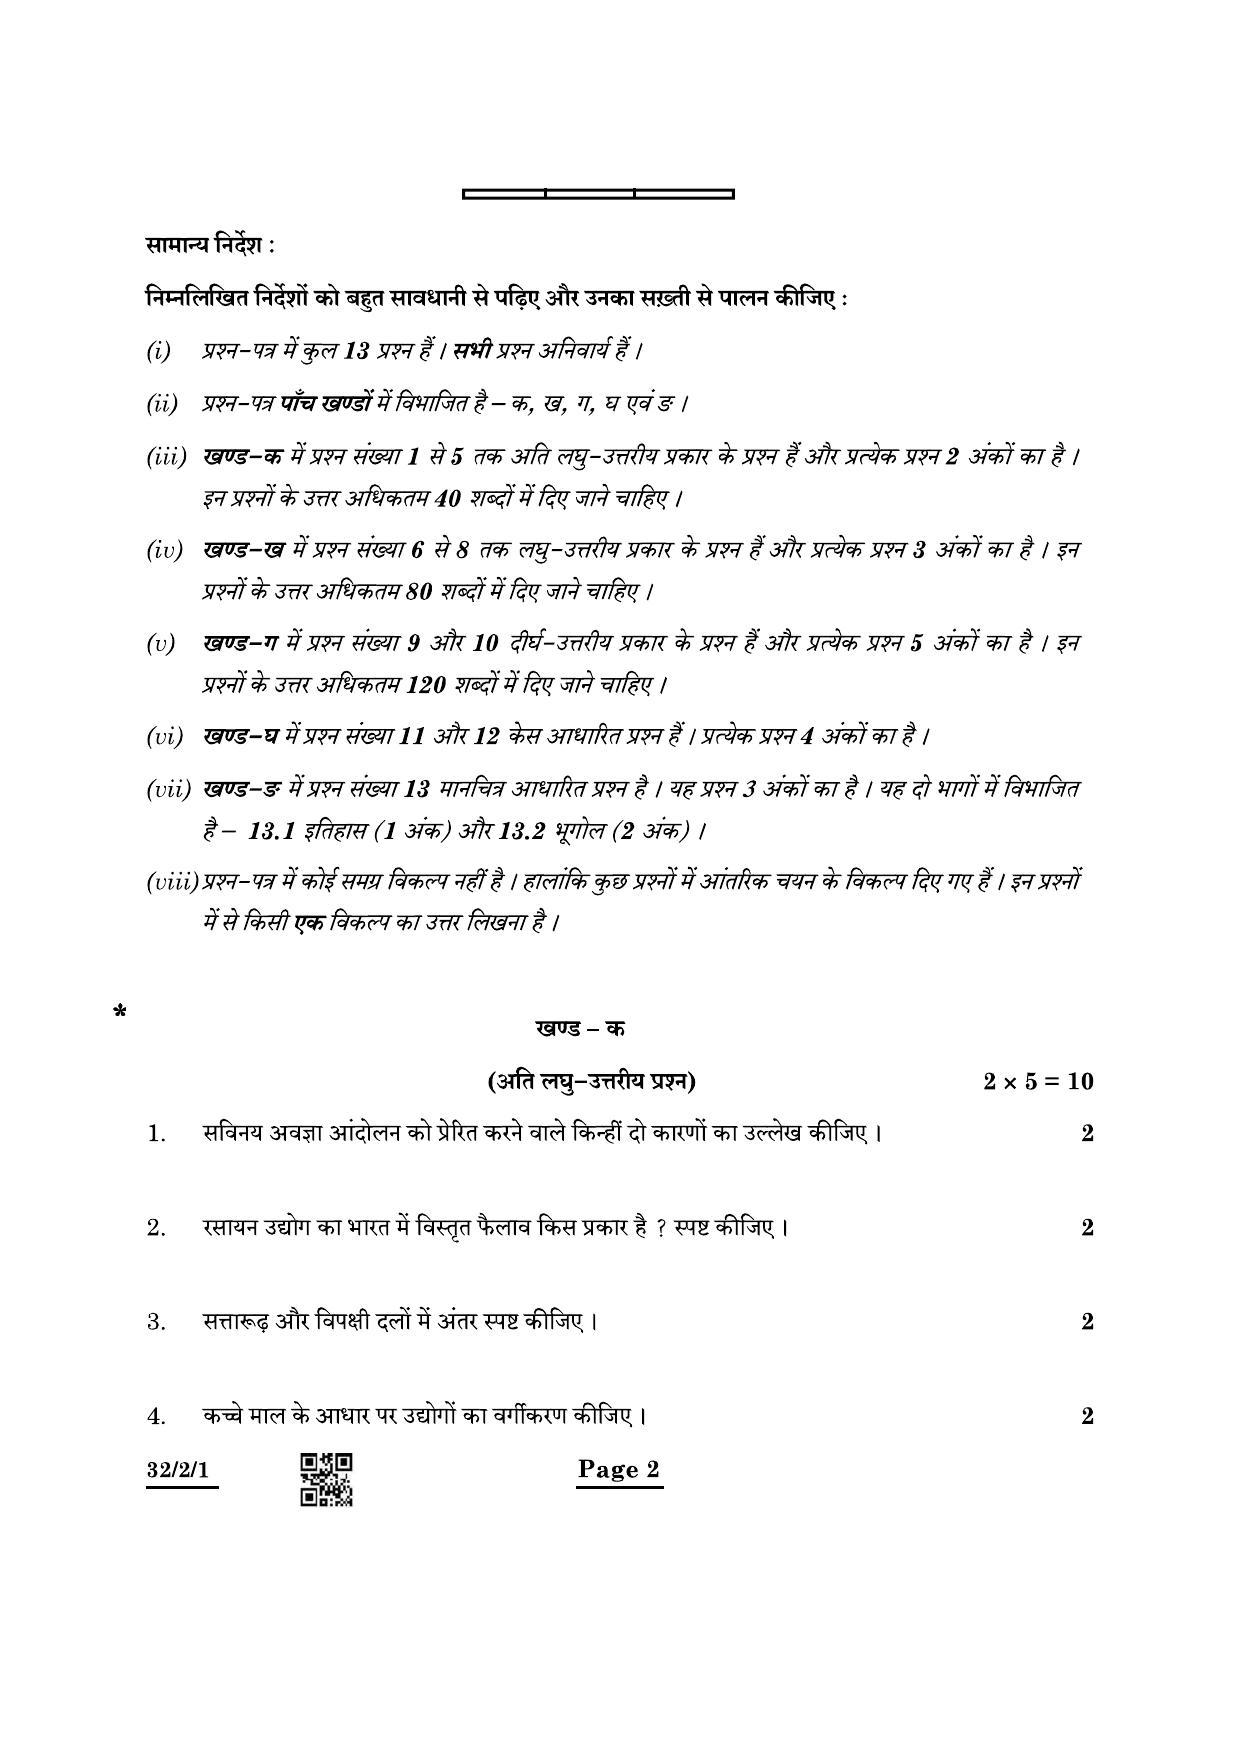 CBSE Class 10 32-2-1 Social Science 2022 Question Paper - Page 2